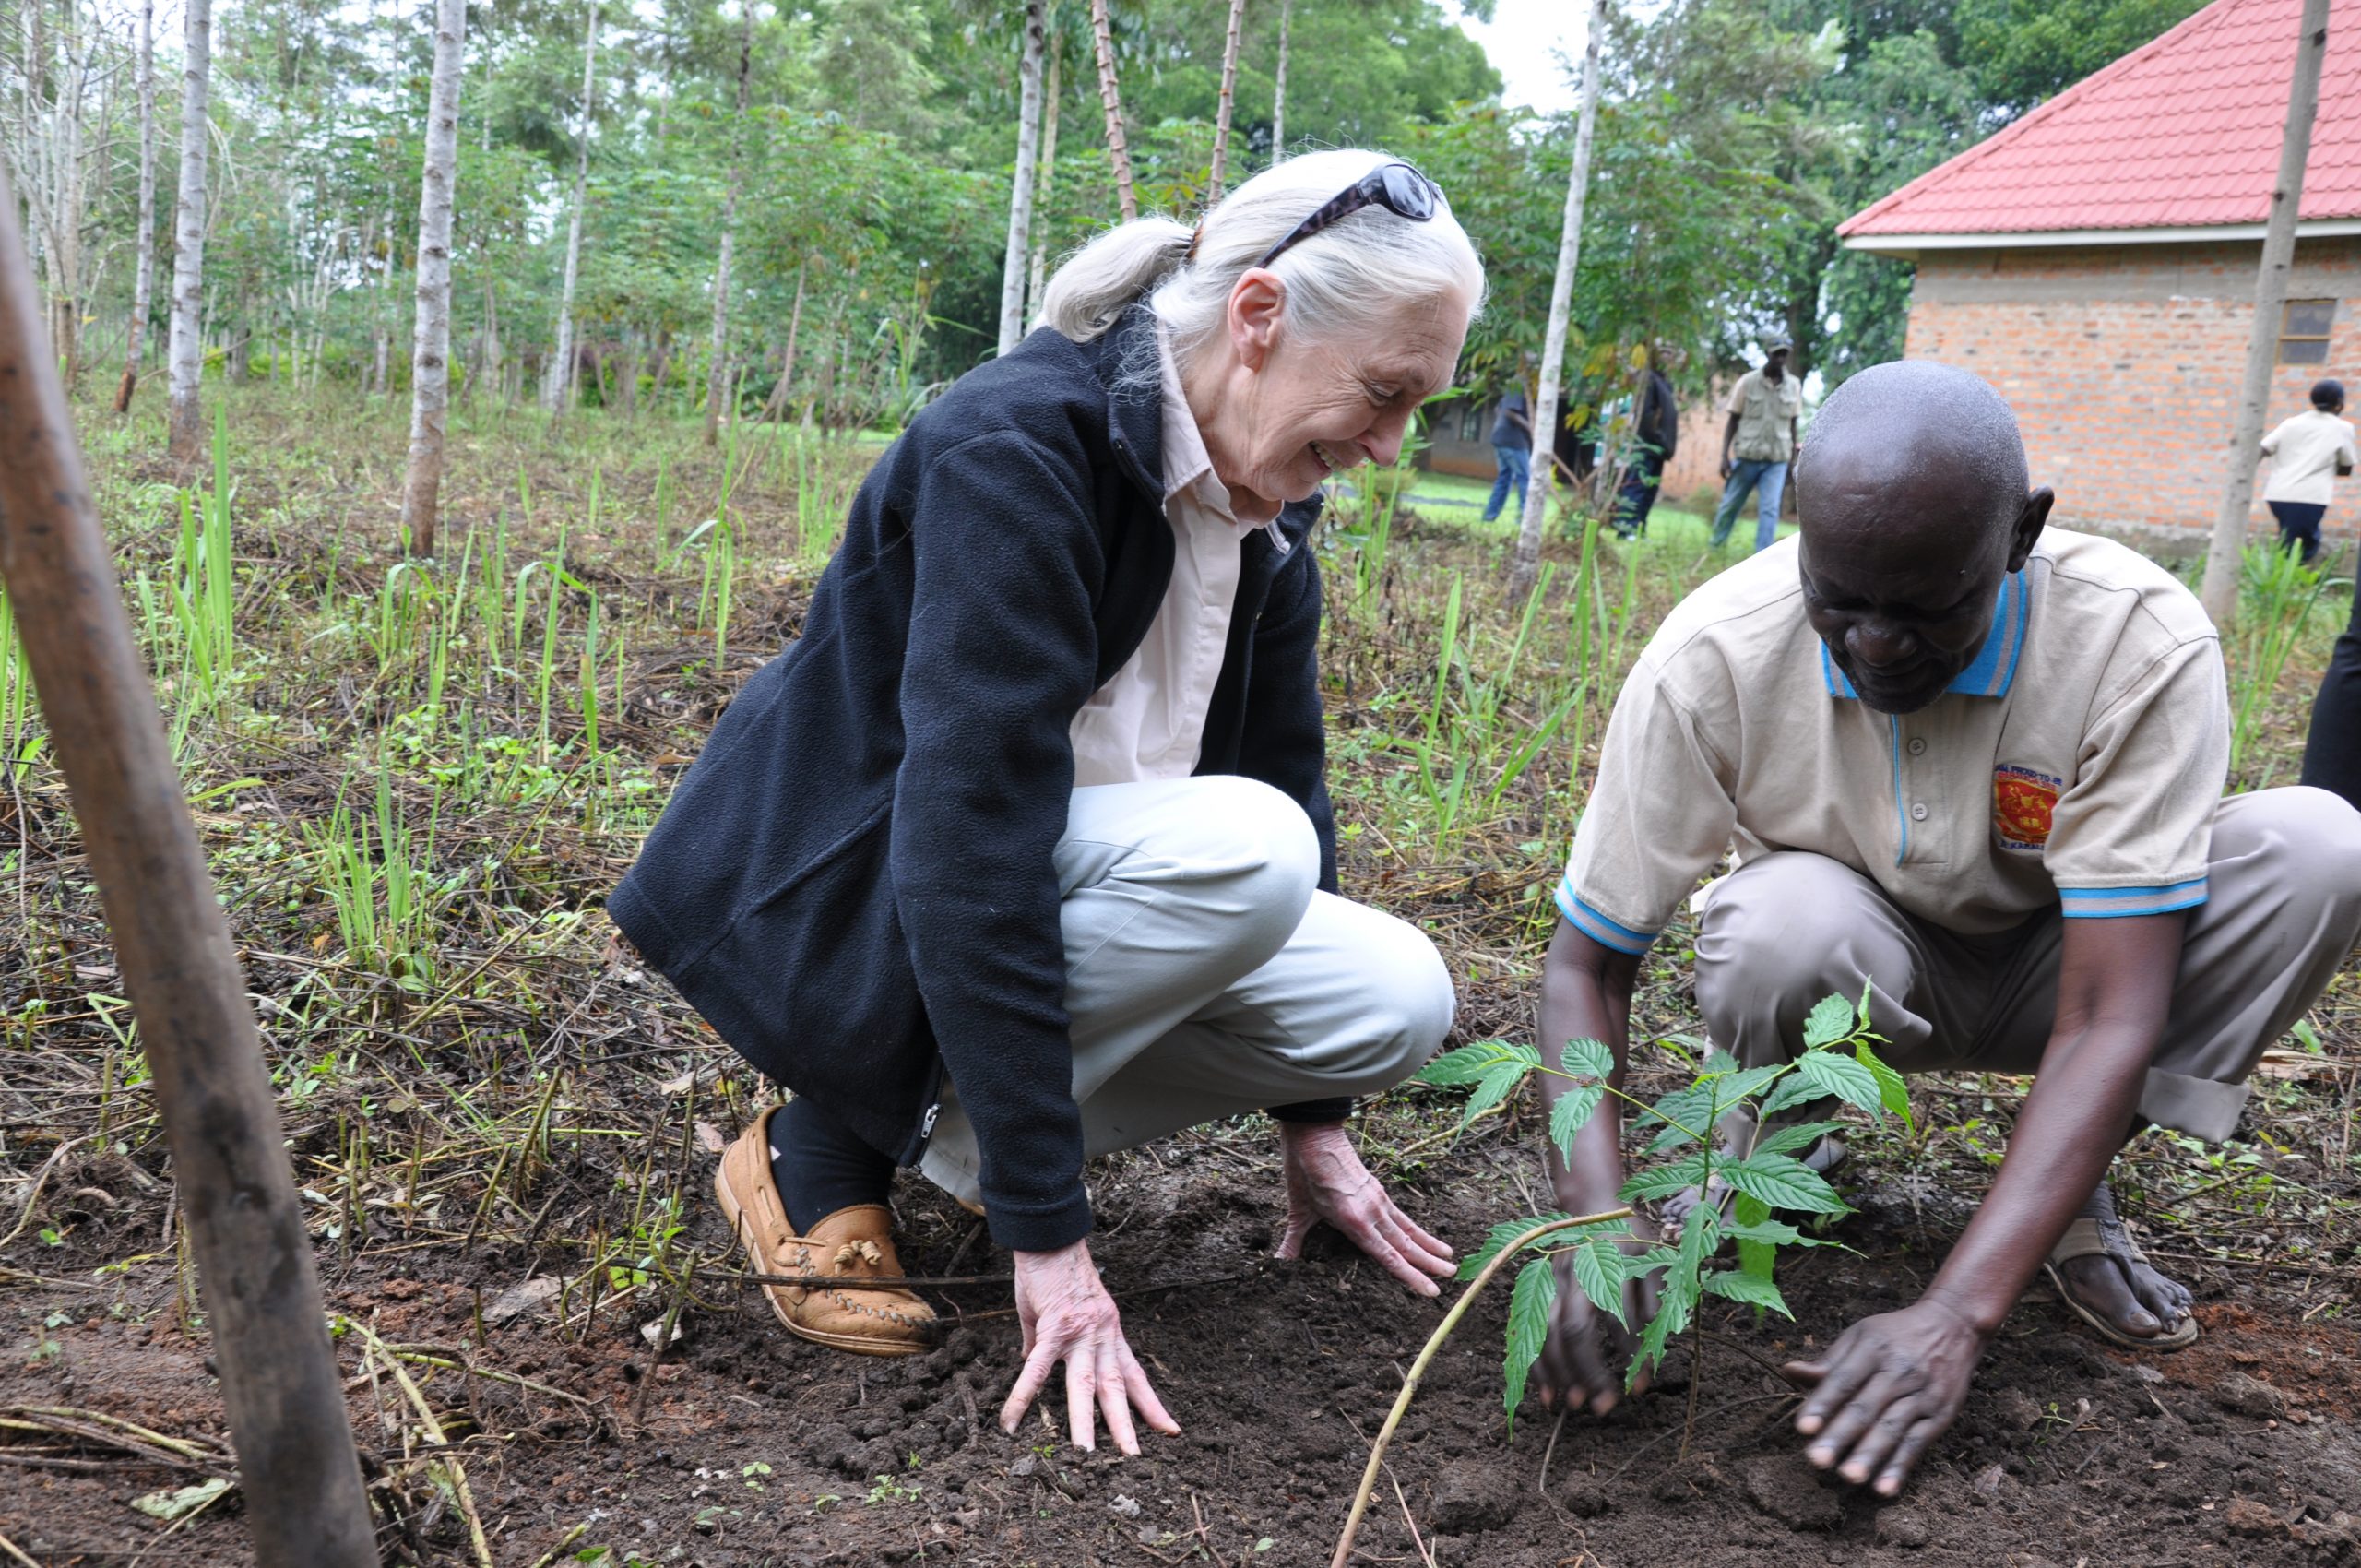 Dr. Jane Goodall Aims To Plant Or Restore 5 Million Trees By 2021